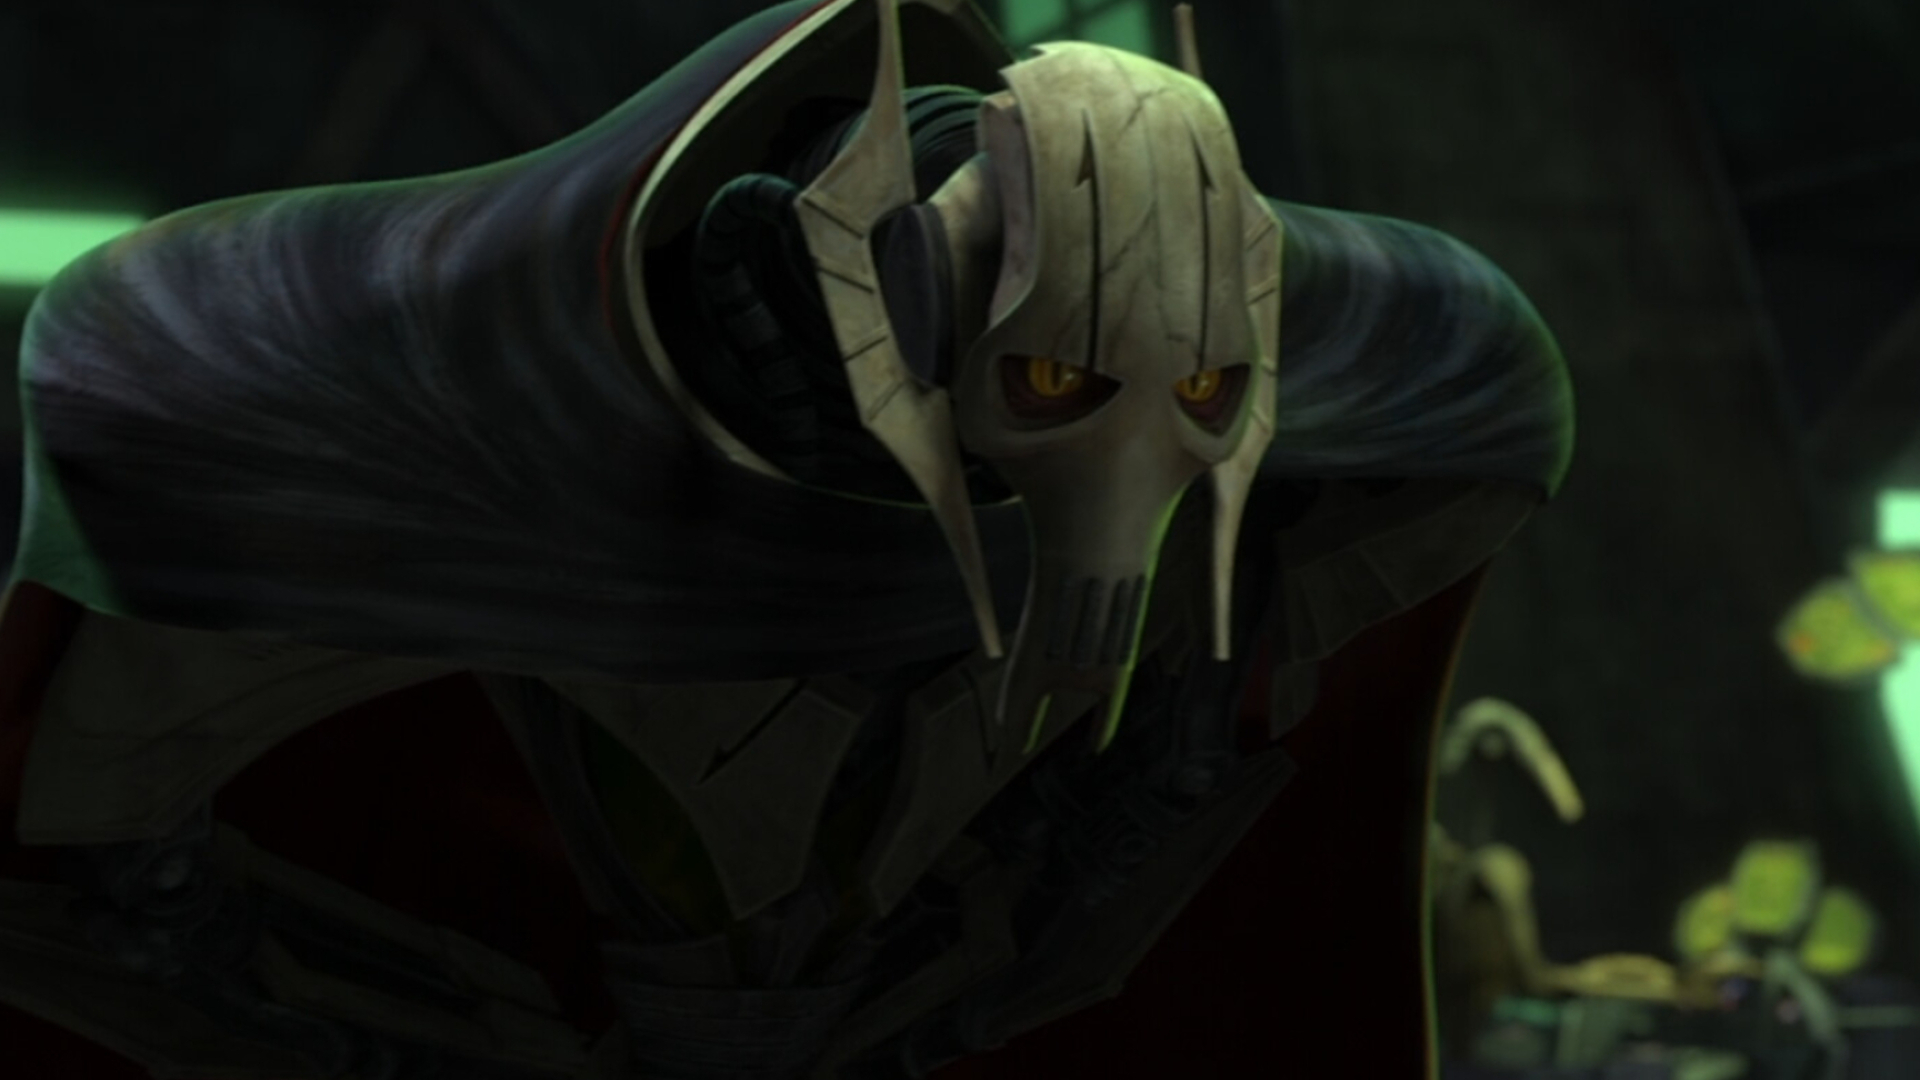 General Grievous: Science fiction, Cyborg, An antagonist from Star Wars Episode III, Featuring in Clone-Wars related Star Wars projects. 1920x1080 Full HD Wallpaper.